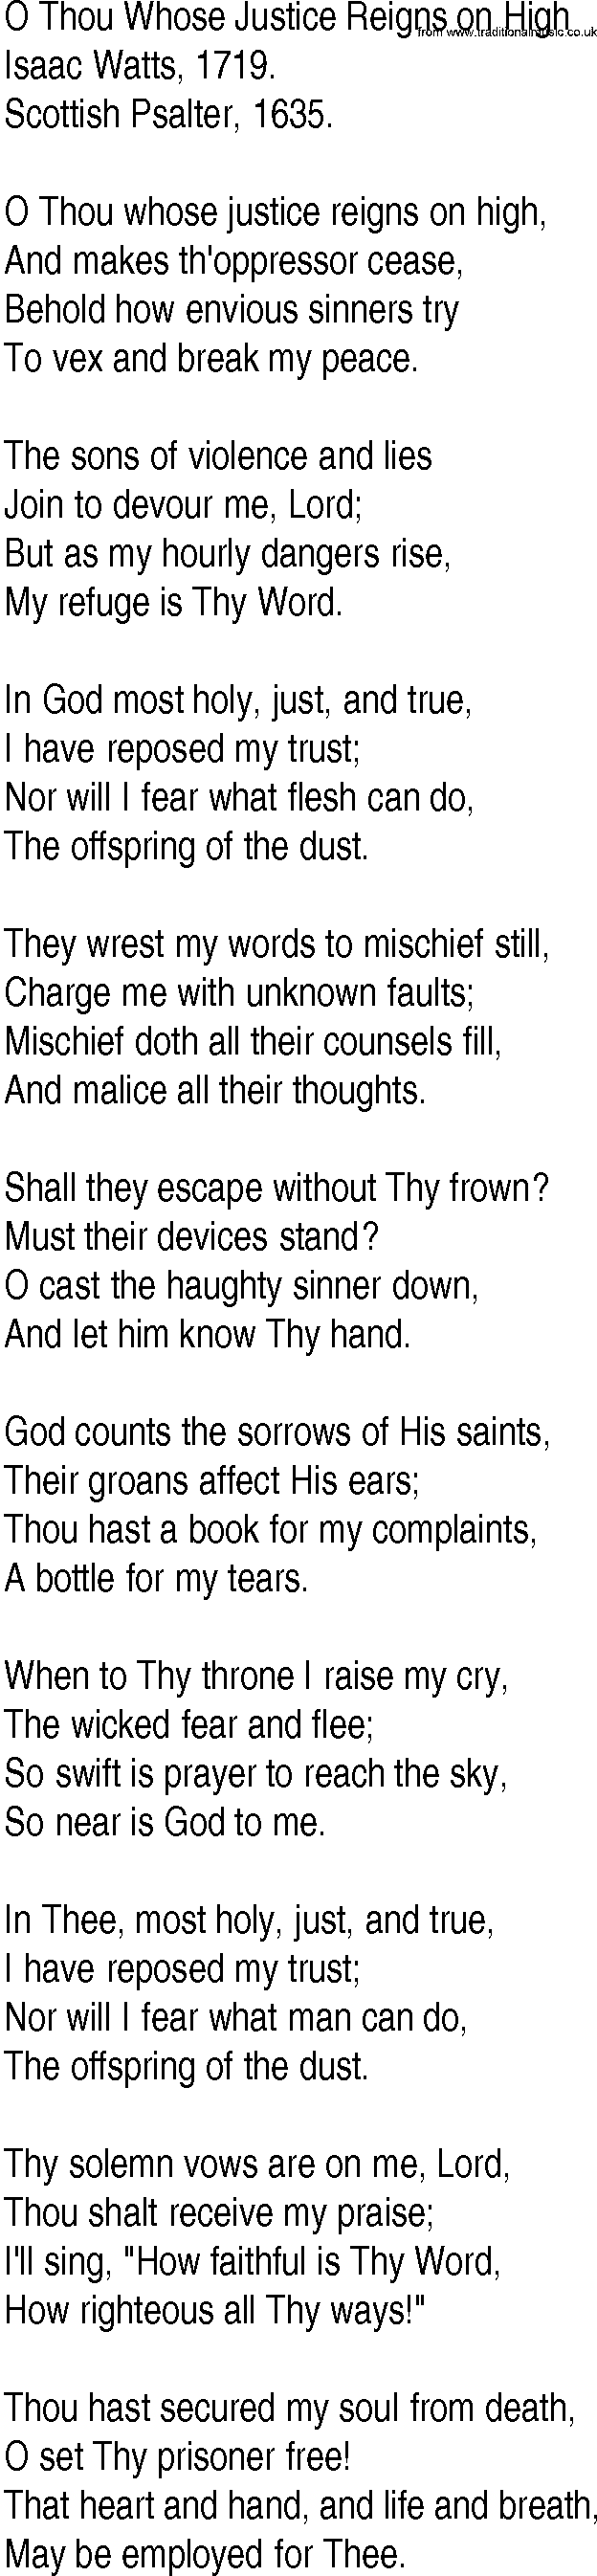 Hymn and Gospel Song: O Thou Whose Justice Reigns on High by Isaac Watts lyrics